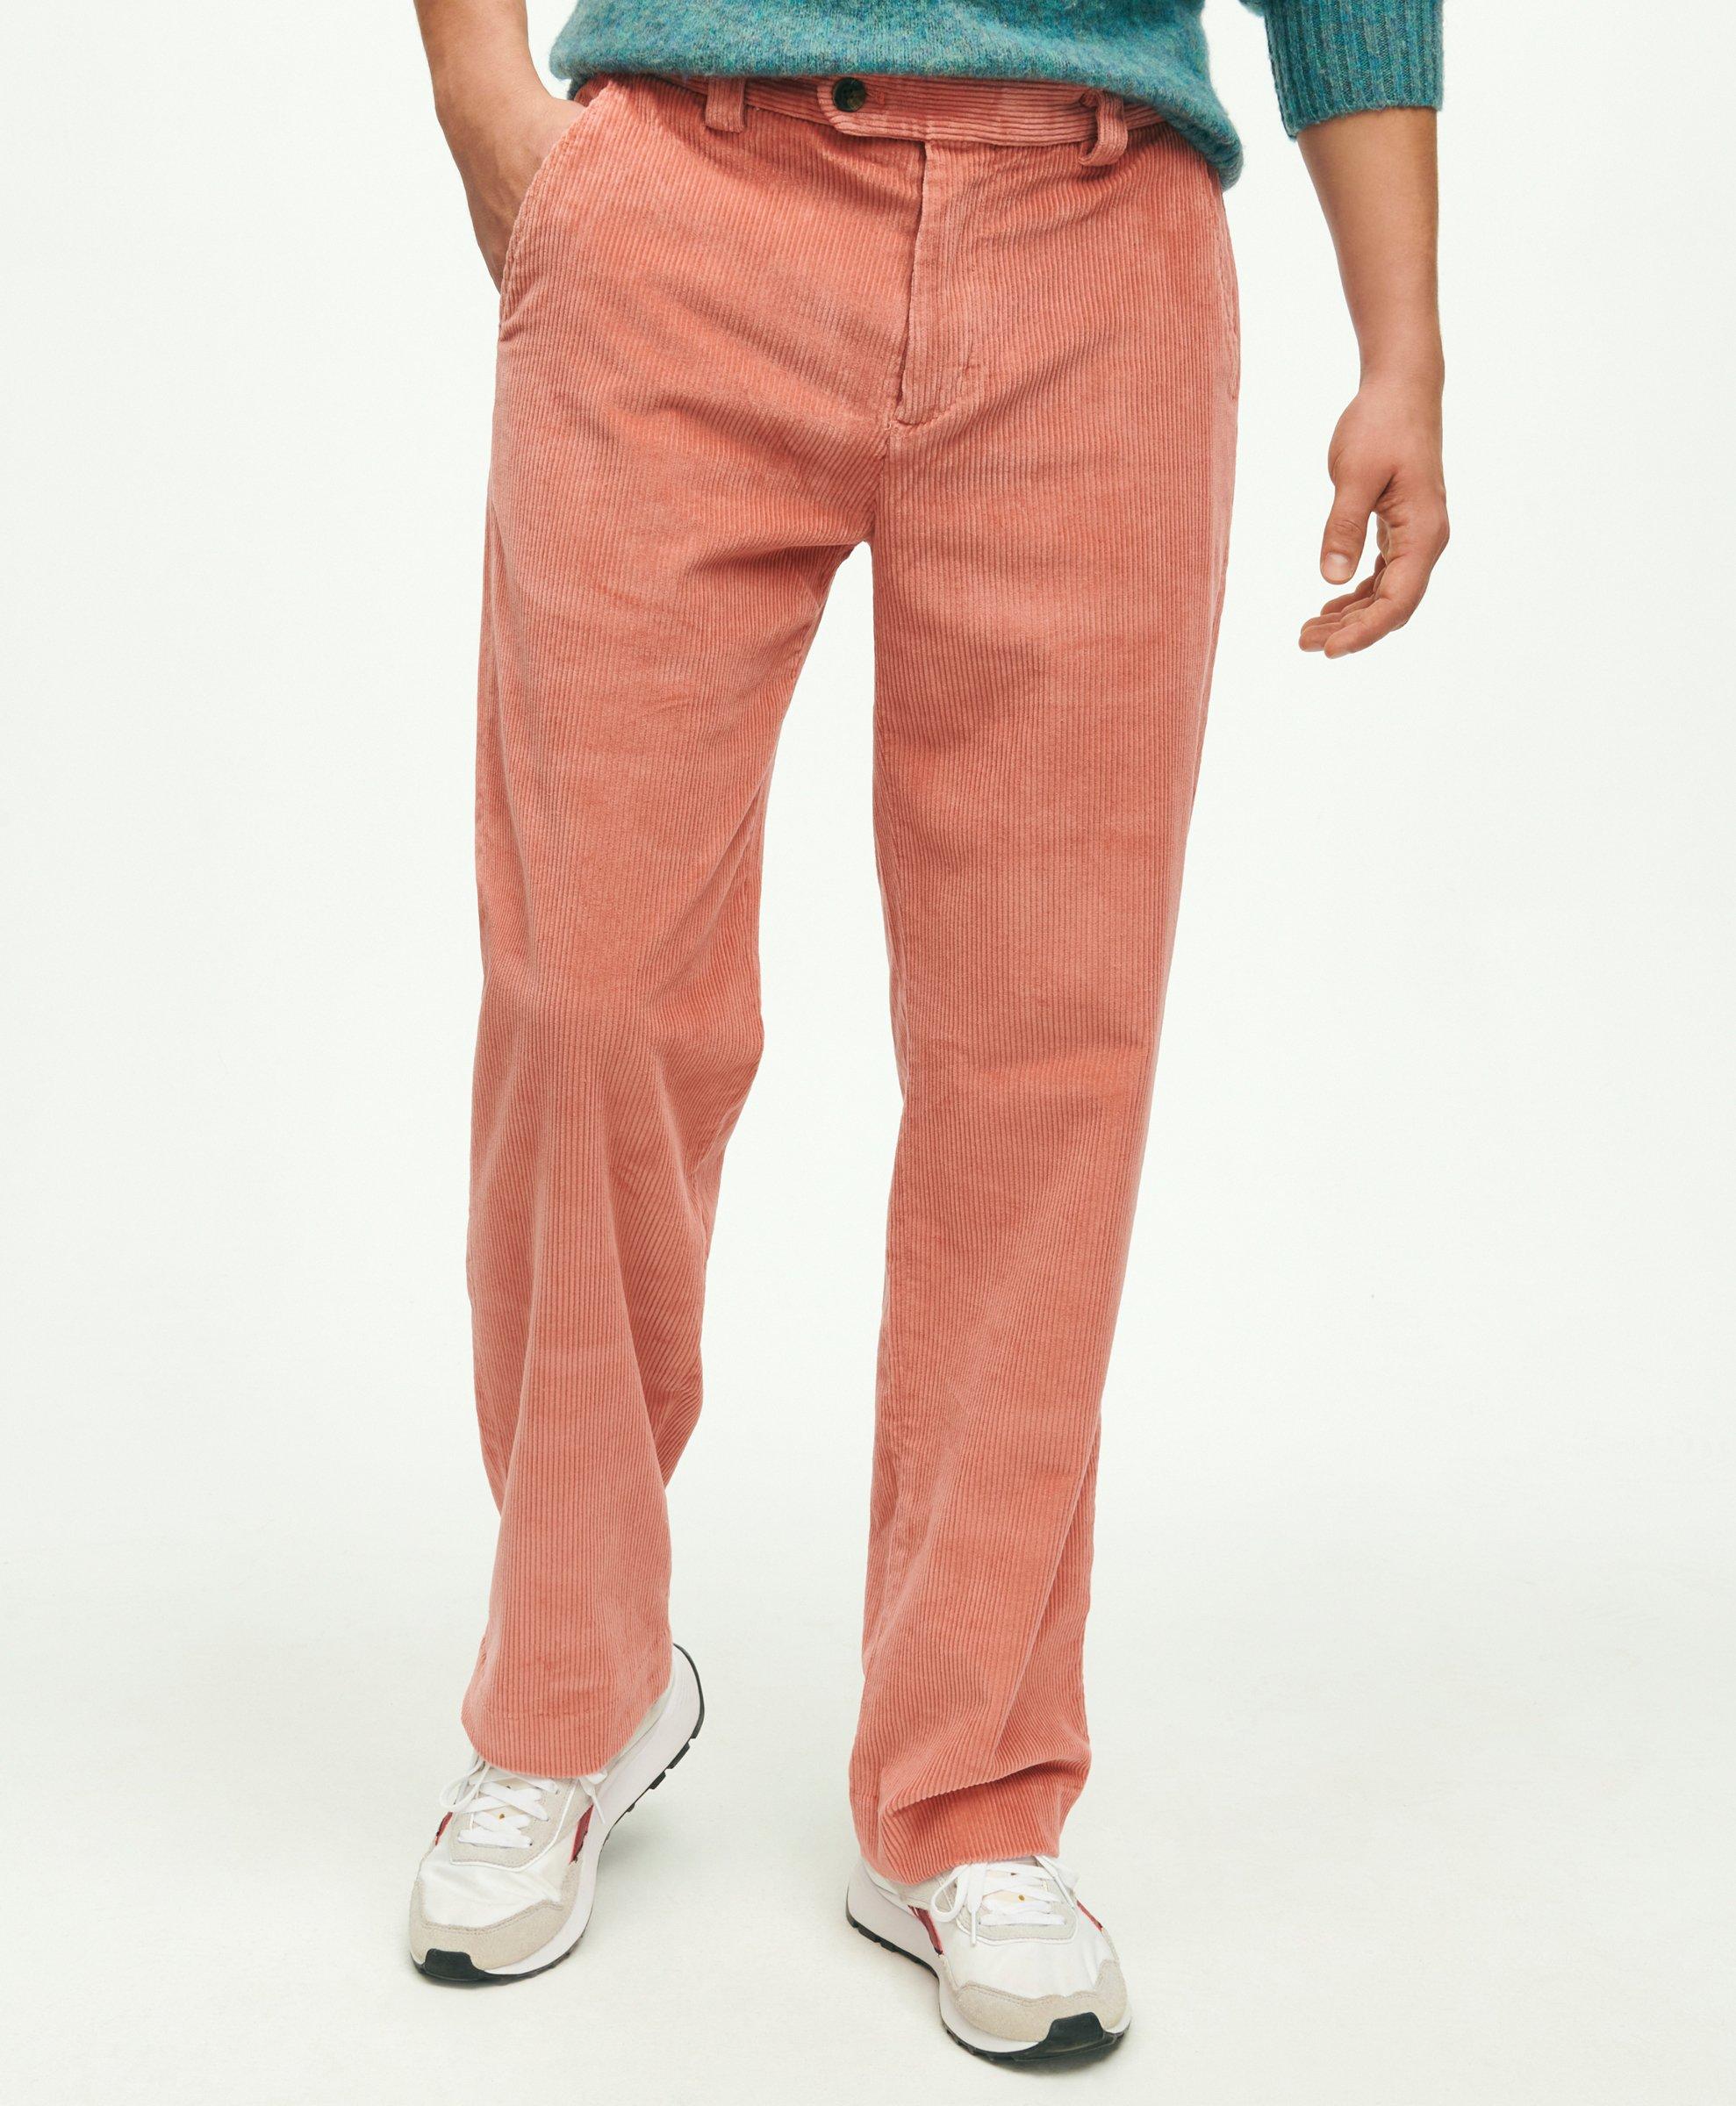 Buy Retro Wide casual pants - Shoptery